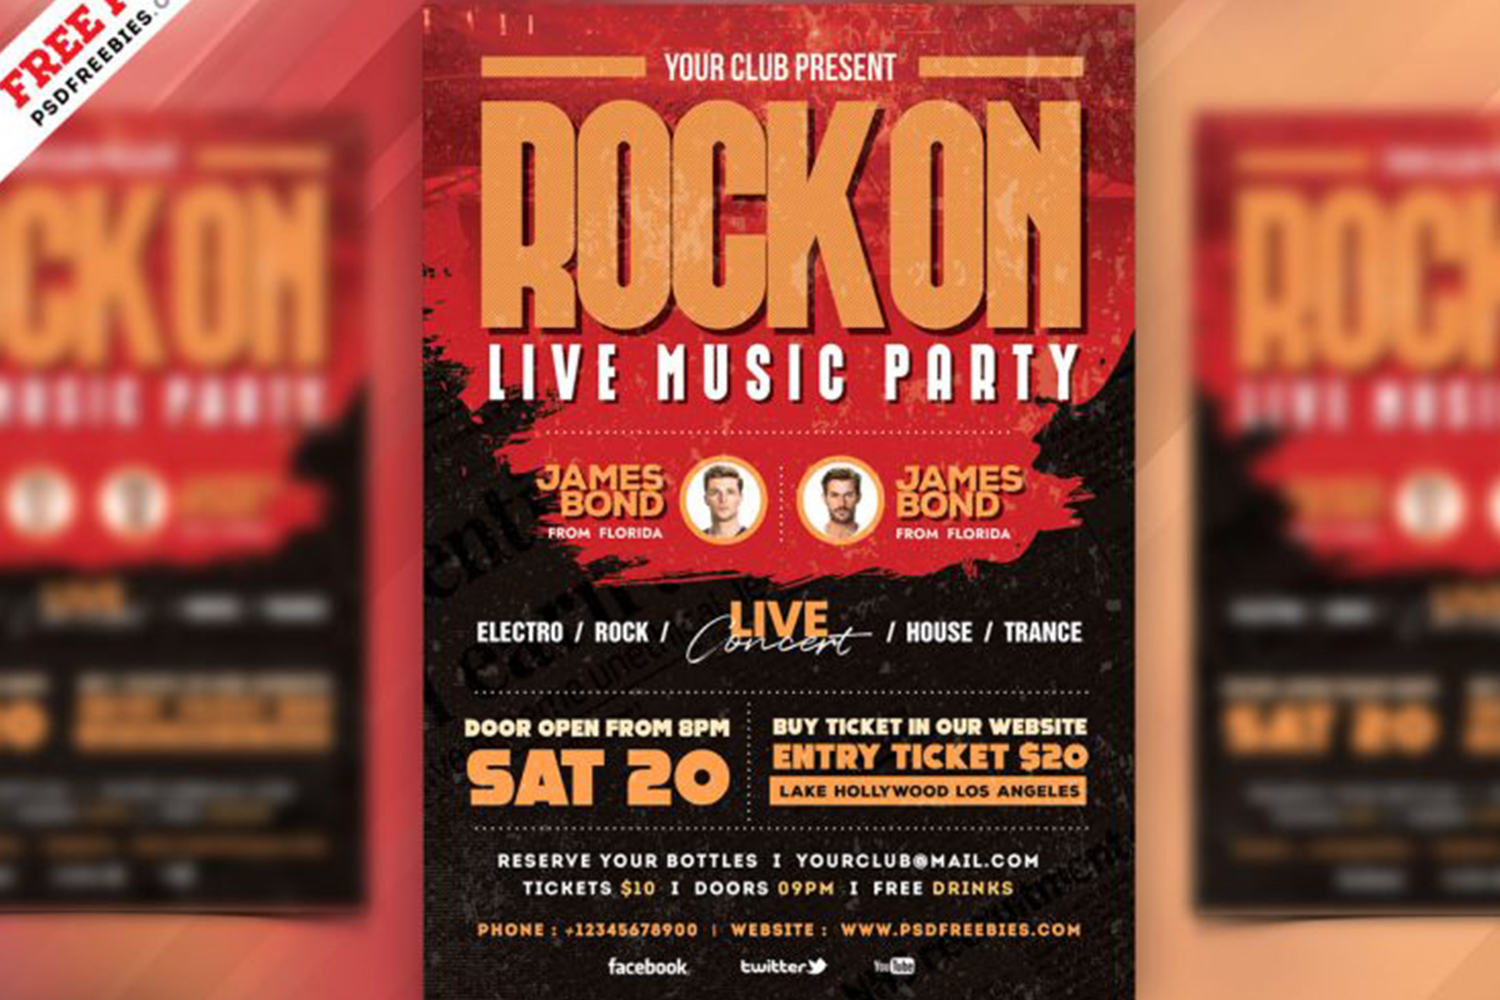 Live Rock Music Event Flyer PSD Free Download